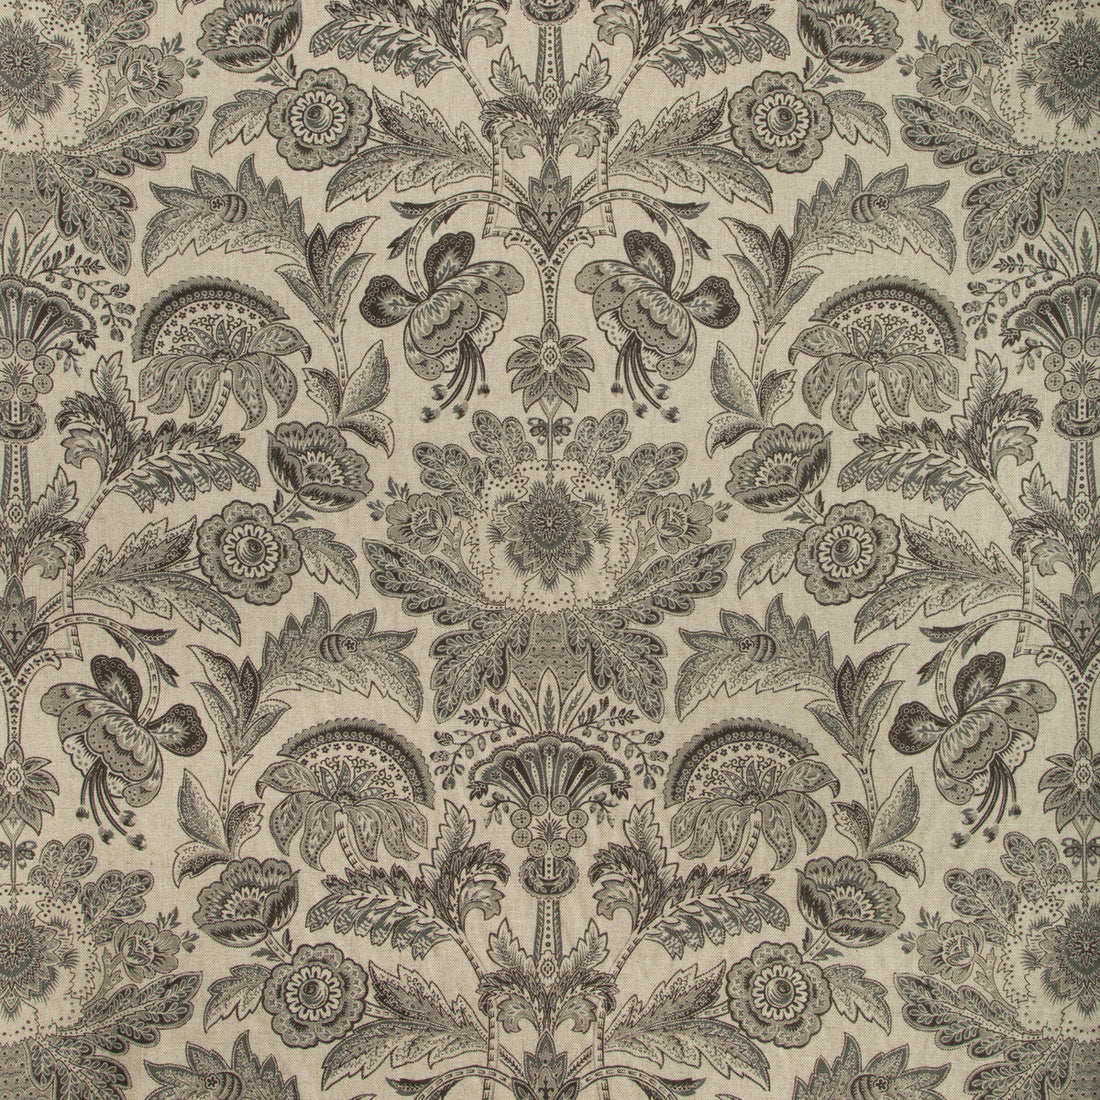 Kent Manor fabric in peat color - pattern KENT MANOR.21.0 - by Kravet Couture in the David Phoenix Well-Suited collection